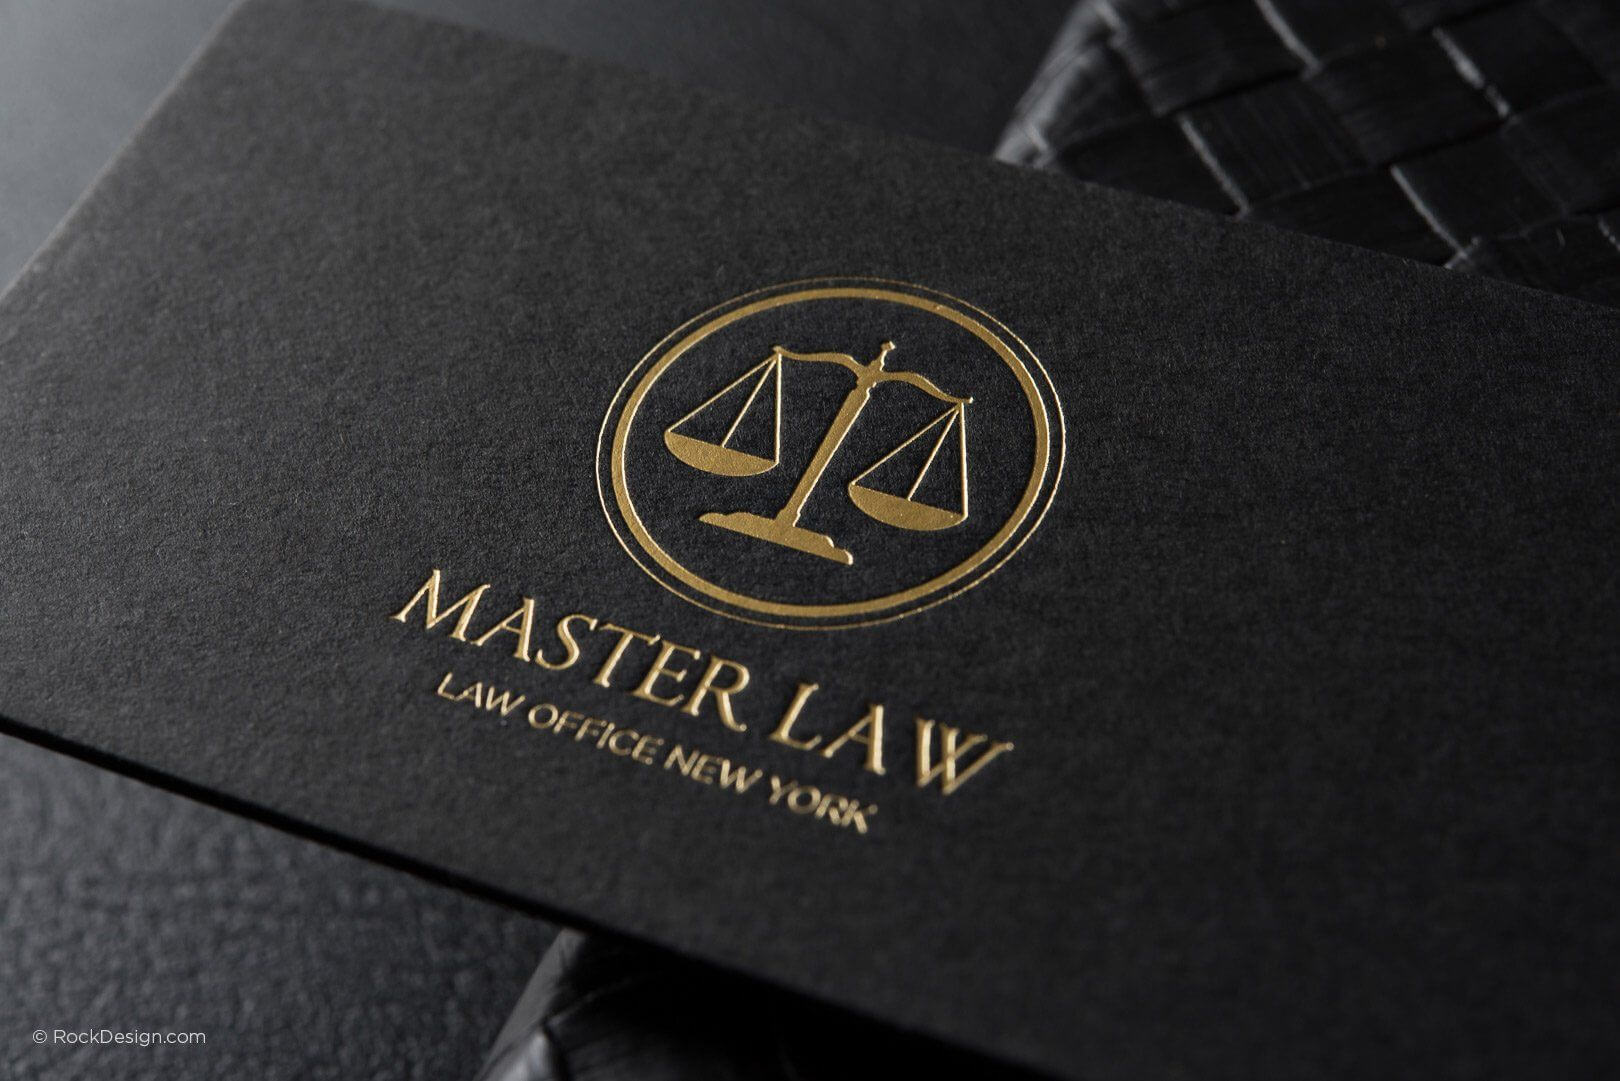 Free Lawyer Business Card Template | Rockdesign | Lawyer Intended For Legal Business Cards Templates Free